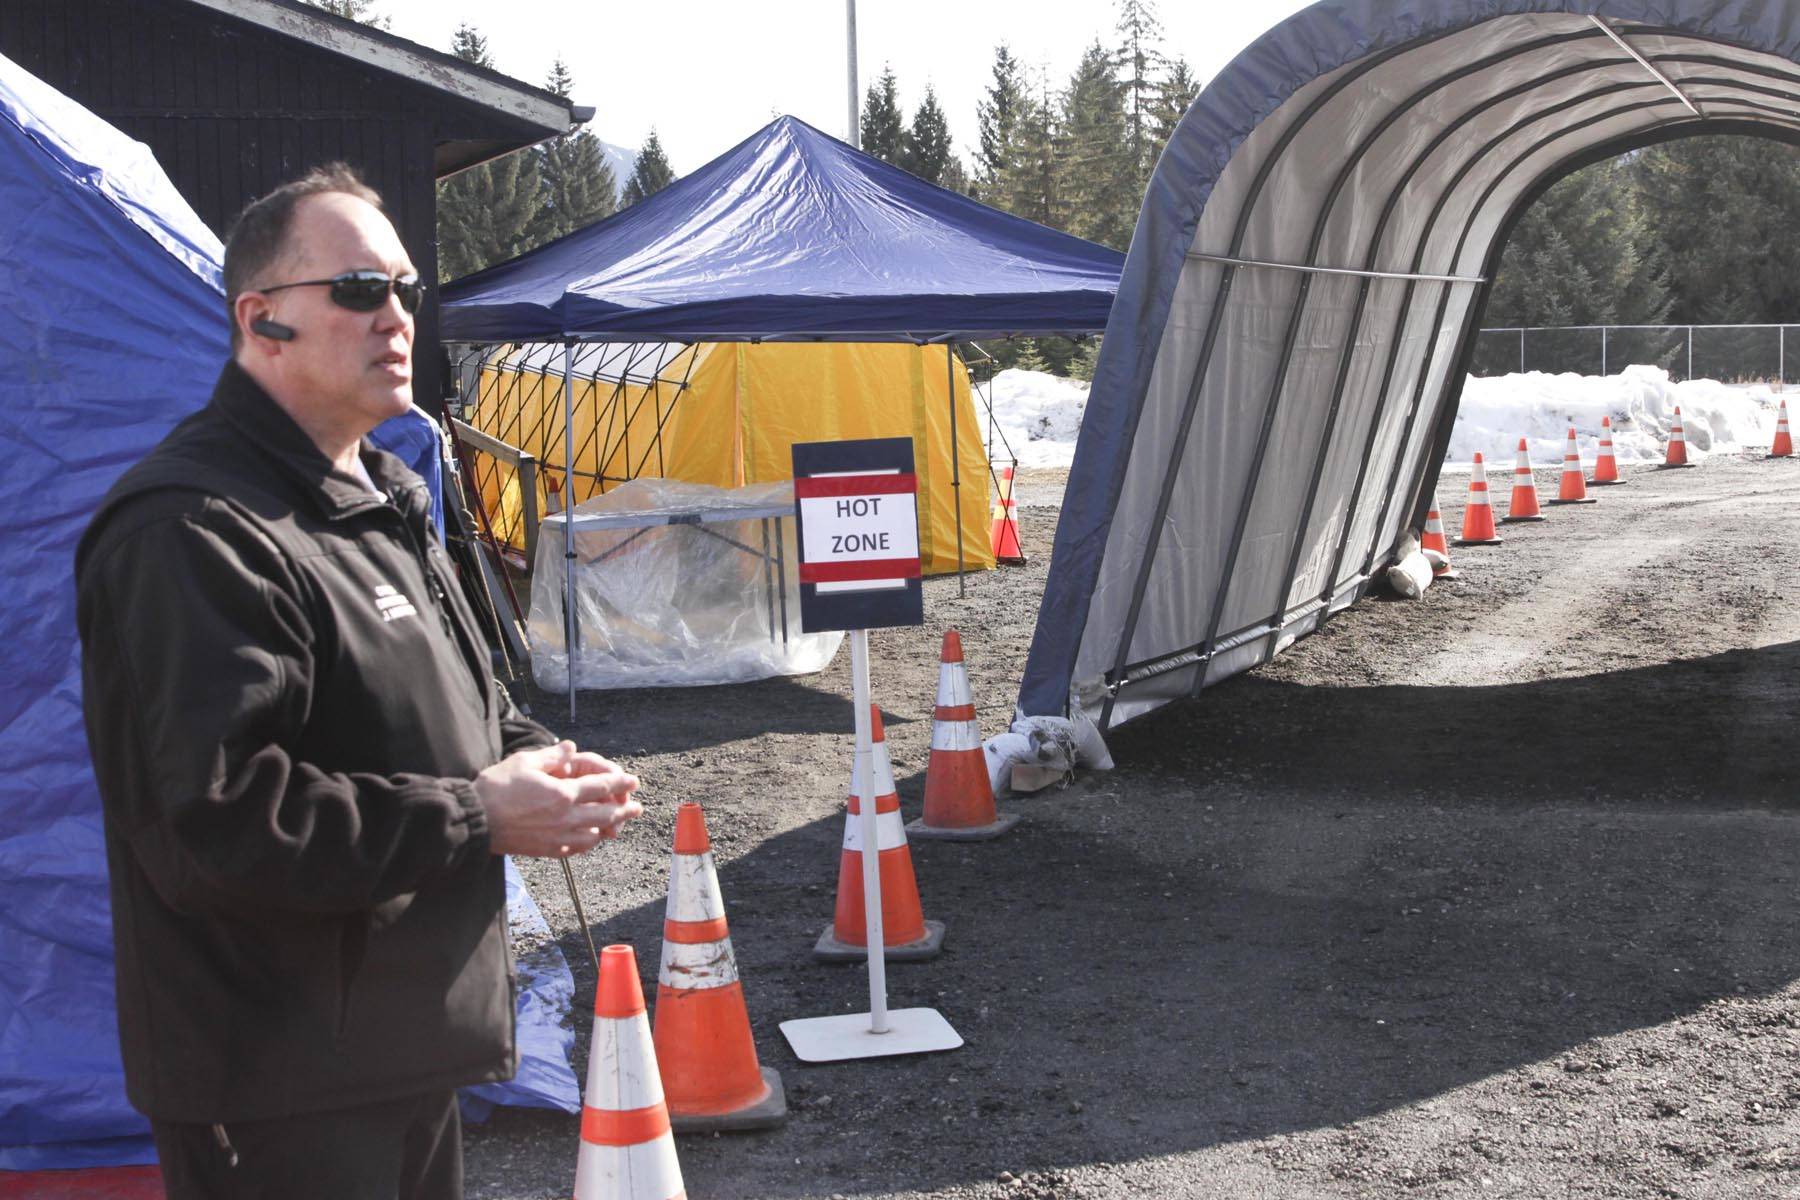 Capital City Fire/Rescue Community Community Assistance Response and Emergency Services manager Joe Mischler talks about the appointment-based drive-thru testing site located at the Hagevig Regional Fire Training Center for possible coronavirus patients, March 24, 2020. (Michael S. Lockett / Juneau Empire File)